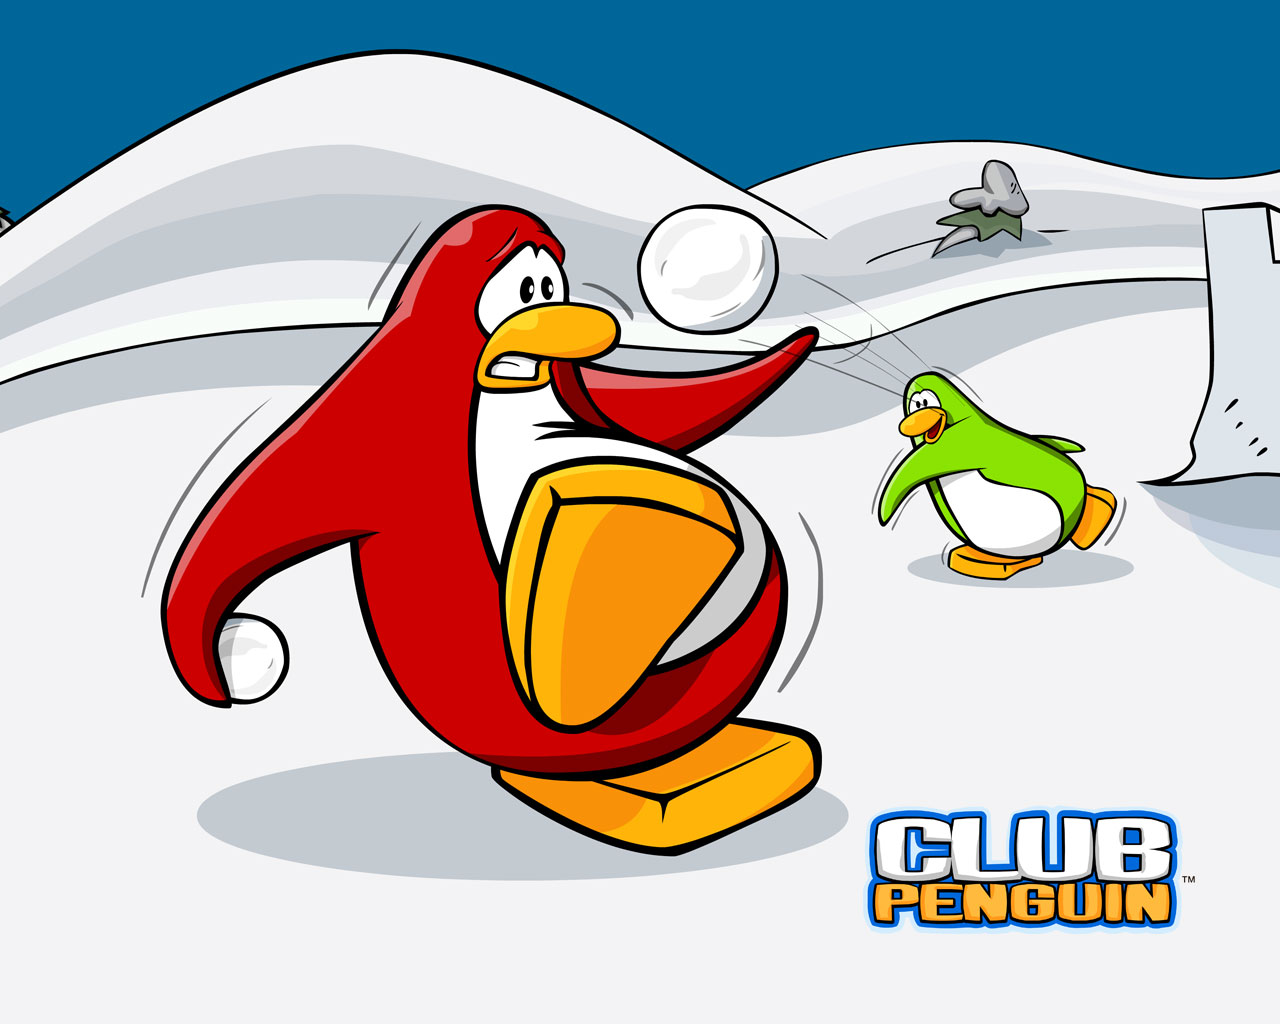 Club Penguin Logo's Changed and also Online Shop Changed ...